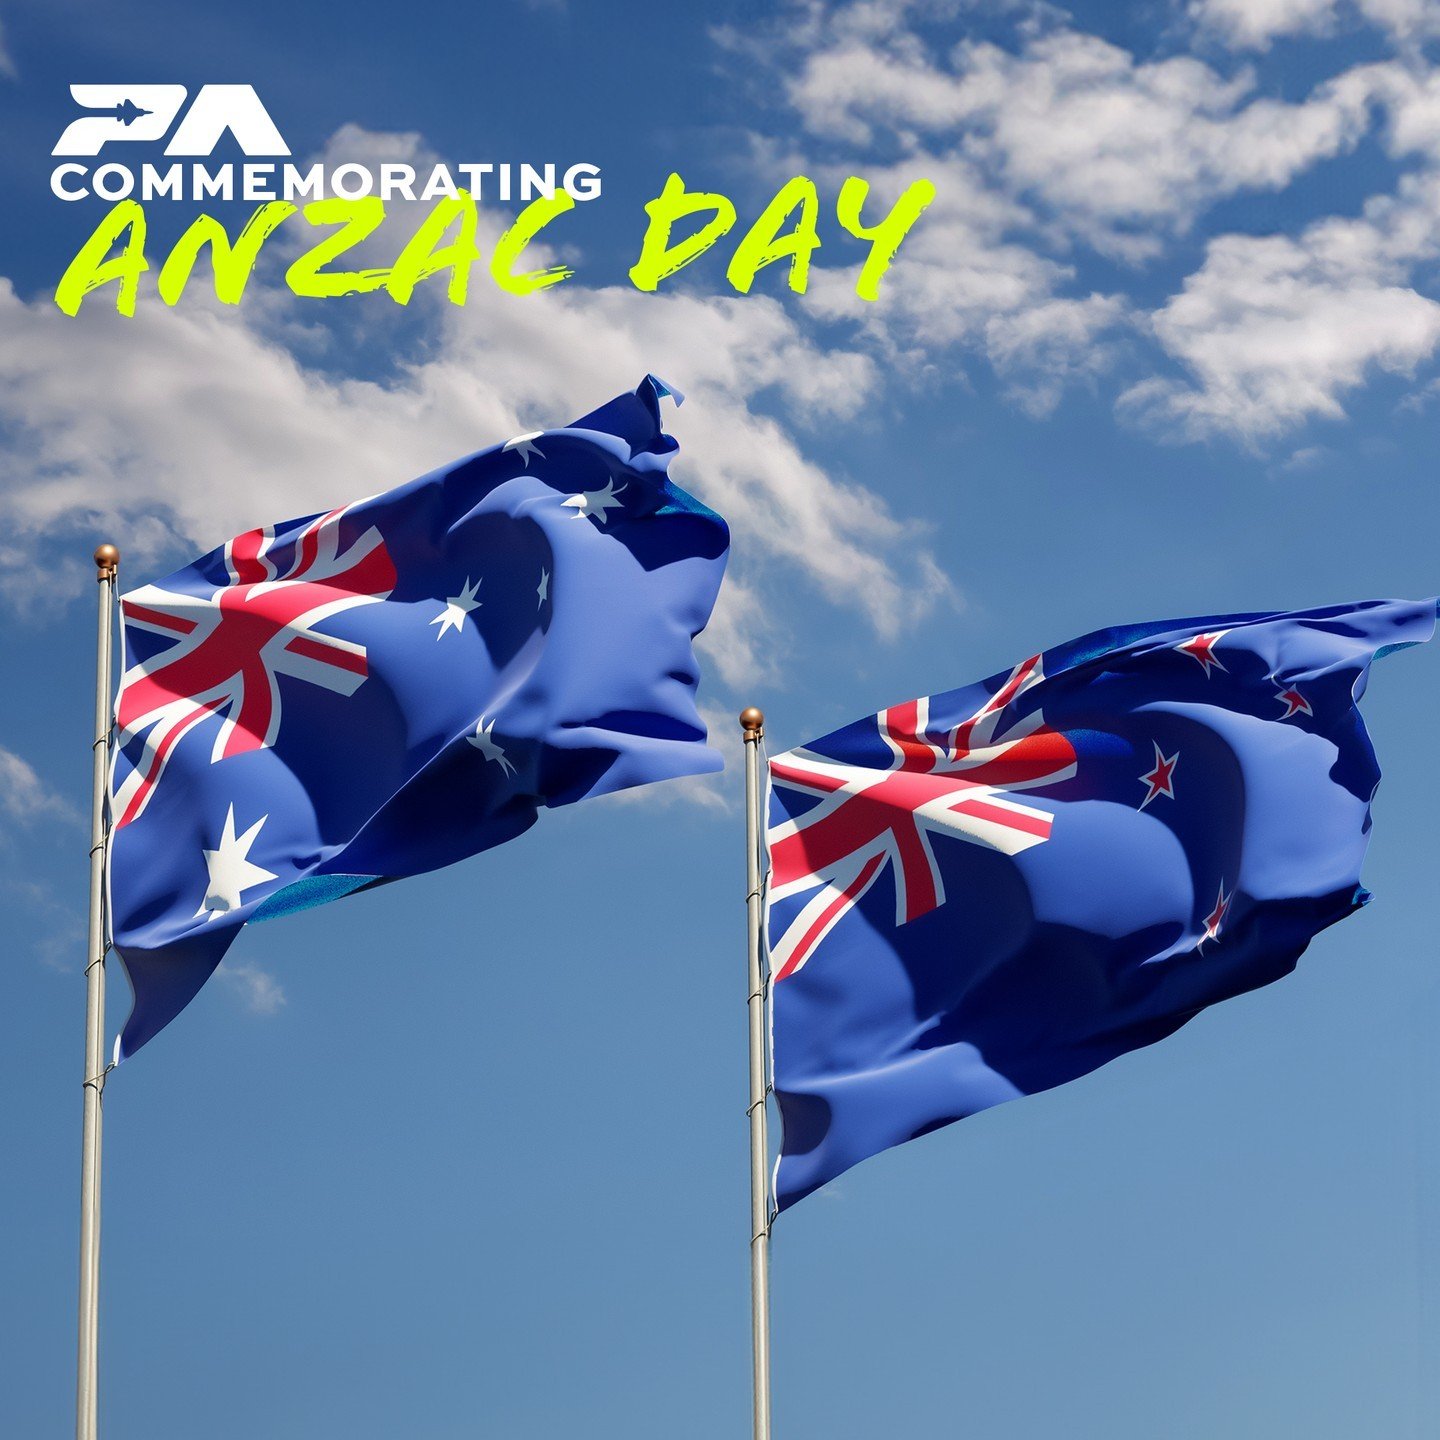 Today on the 25th April in Australia and New Zealand, we honor the courage and spirit of the ANZAC's.

Together we commemorate their sacrifice and reflect on the sacrifices and resilience demonstrated on this day of remembrance. We will honor our ANZ